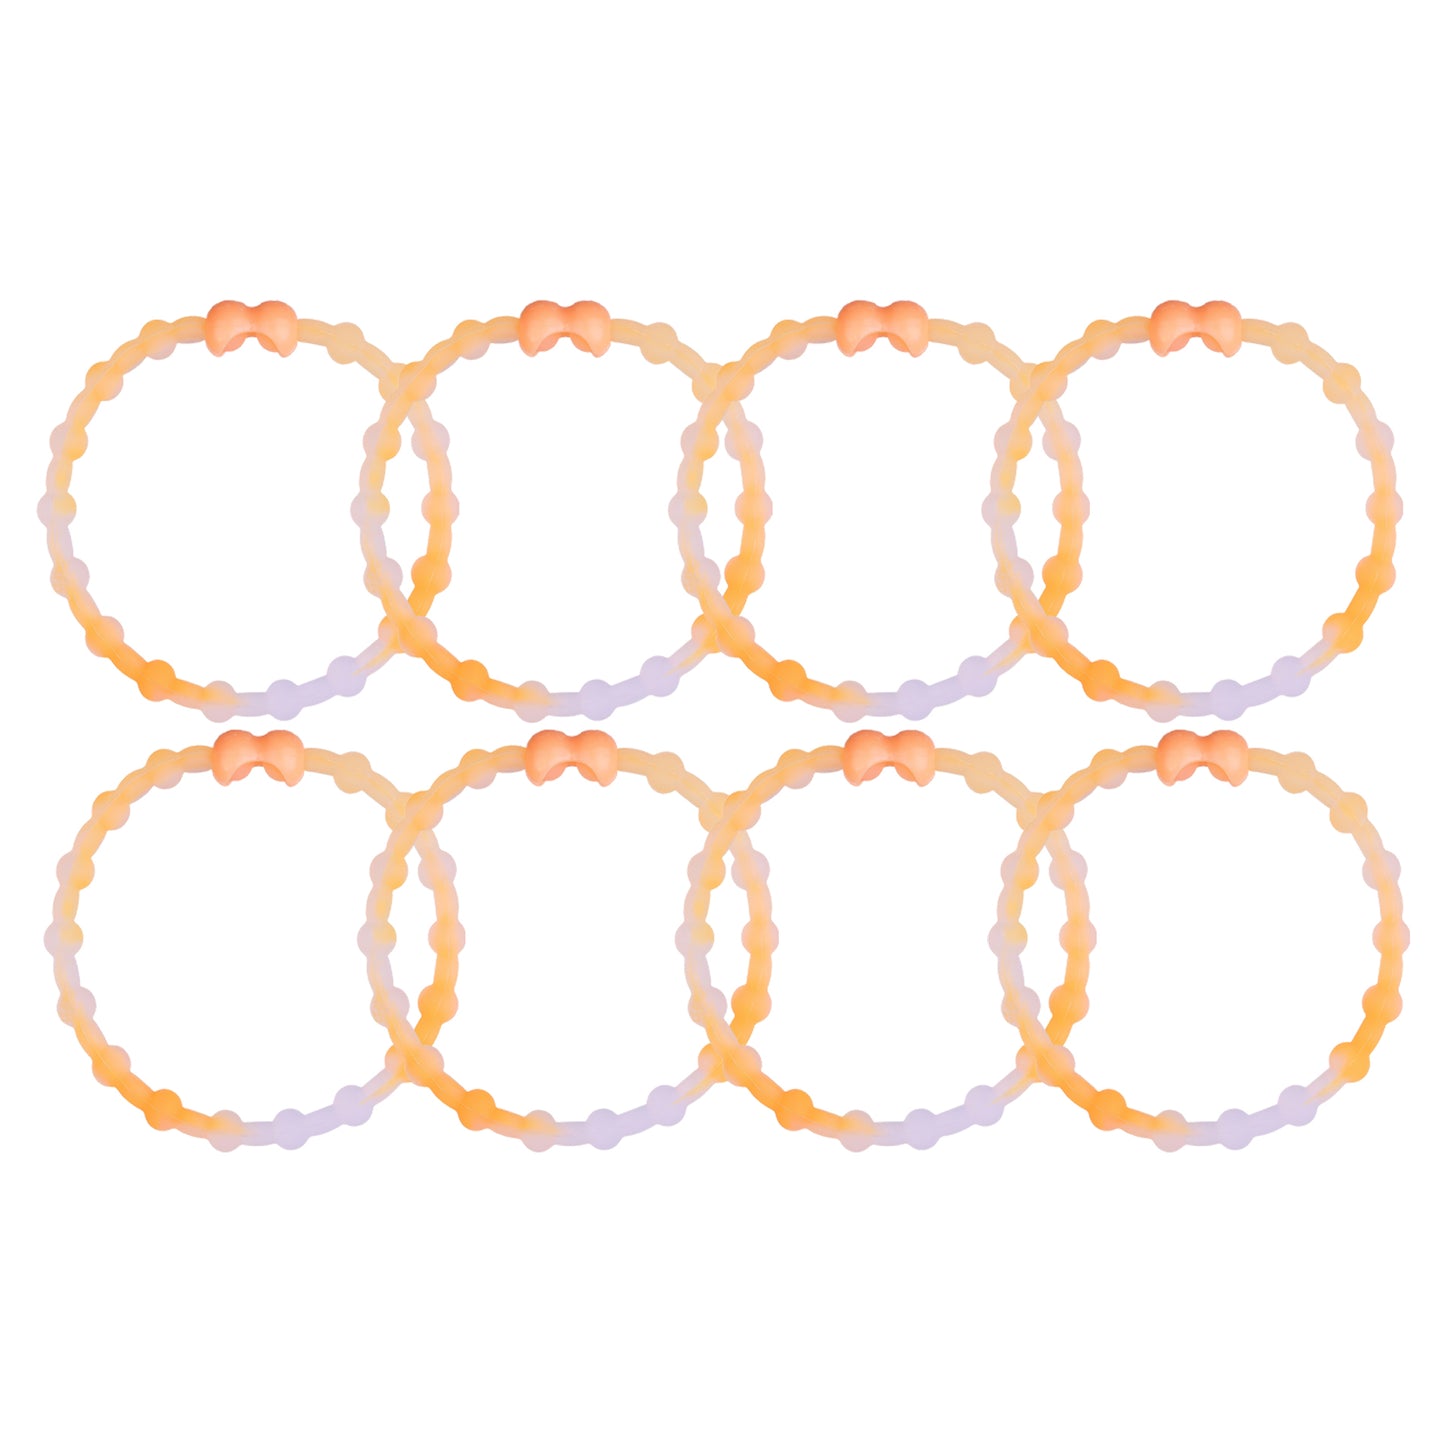 Clear Neon Orange Hair Ties (8 Pack) - A Burst of Citrusy Energy for Every Style